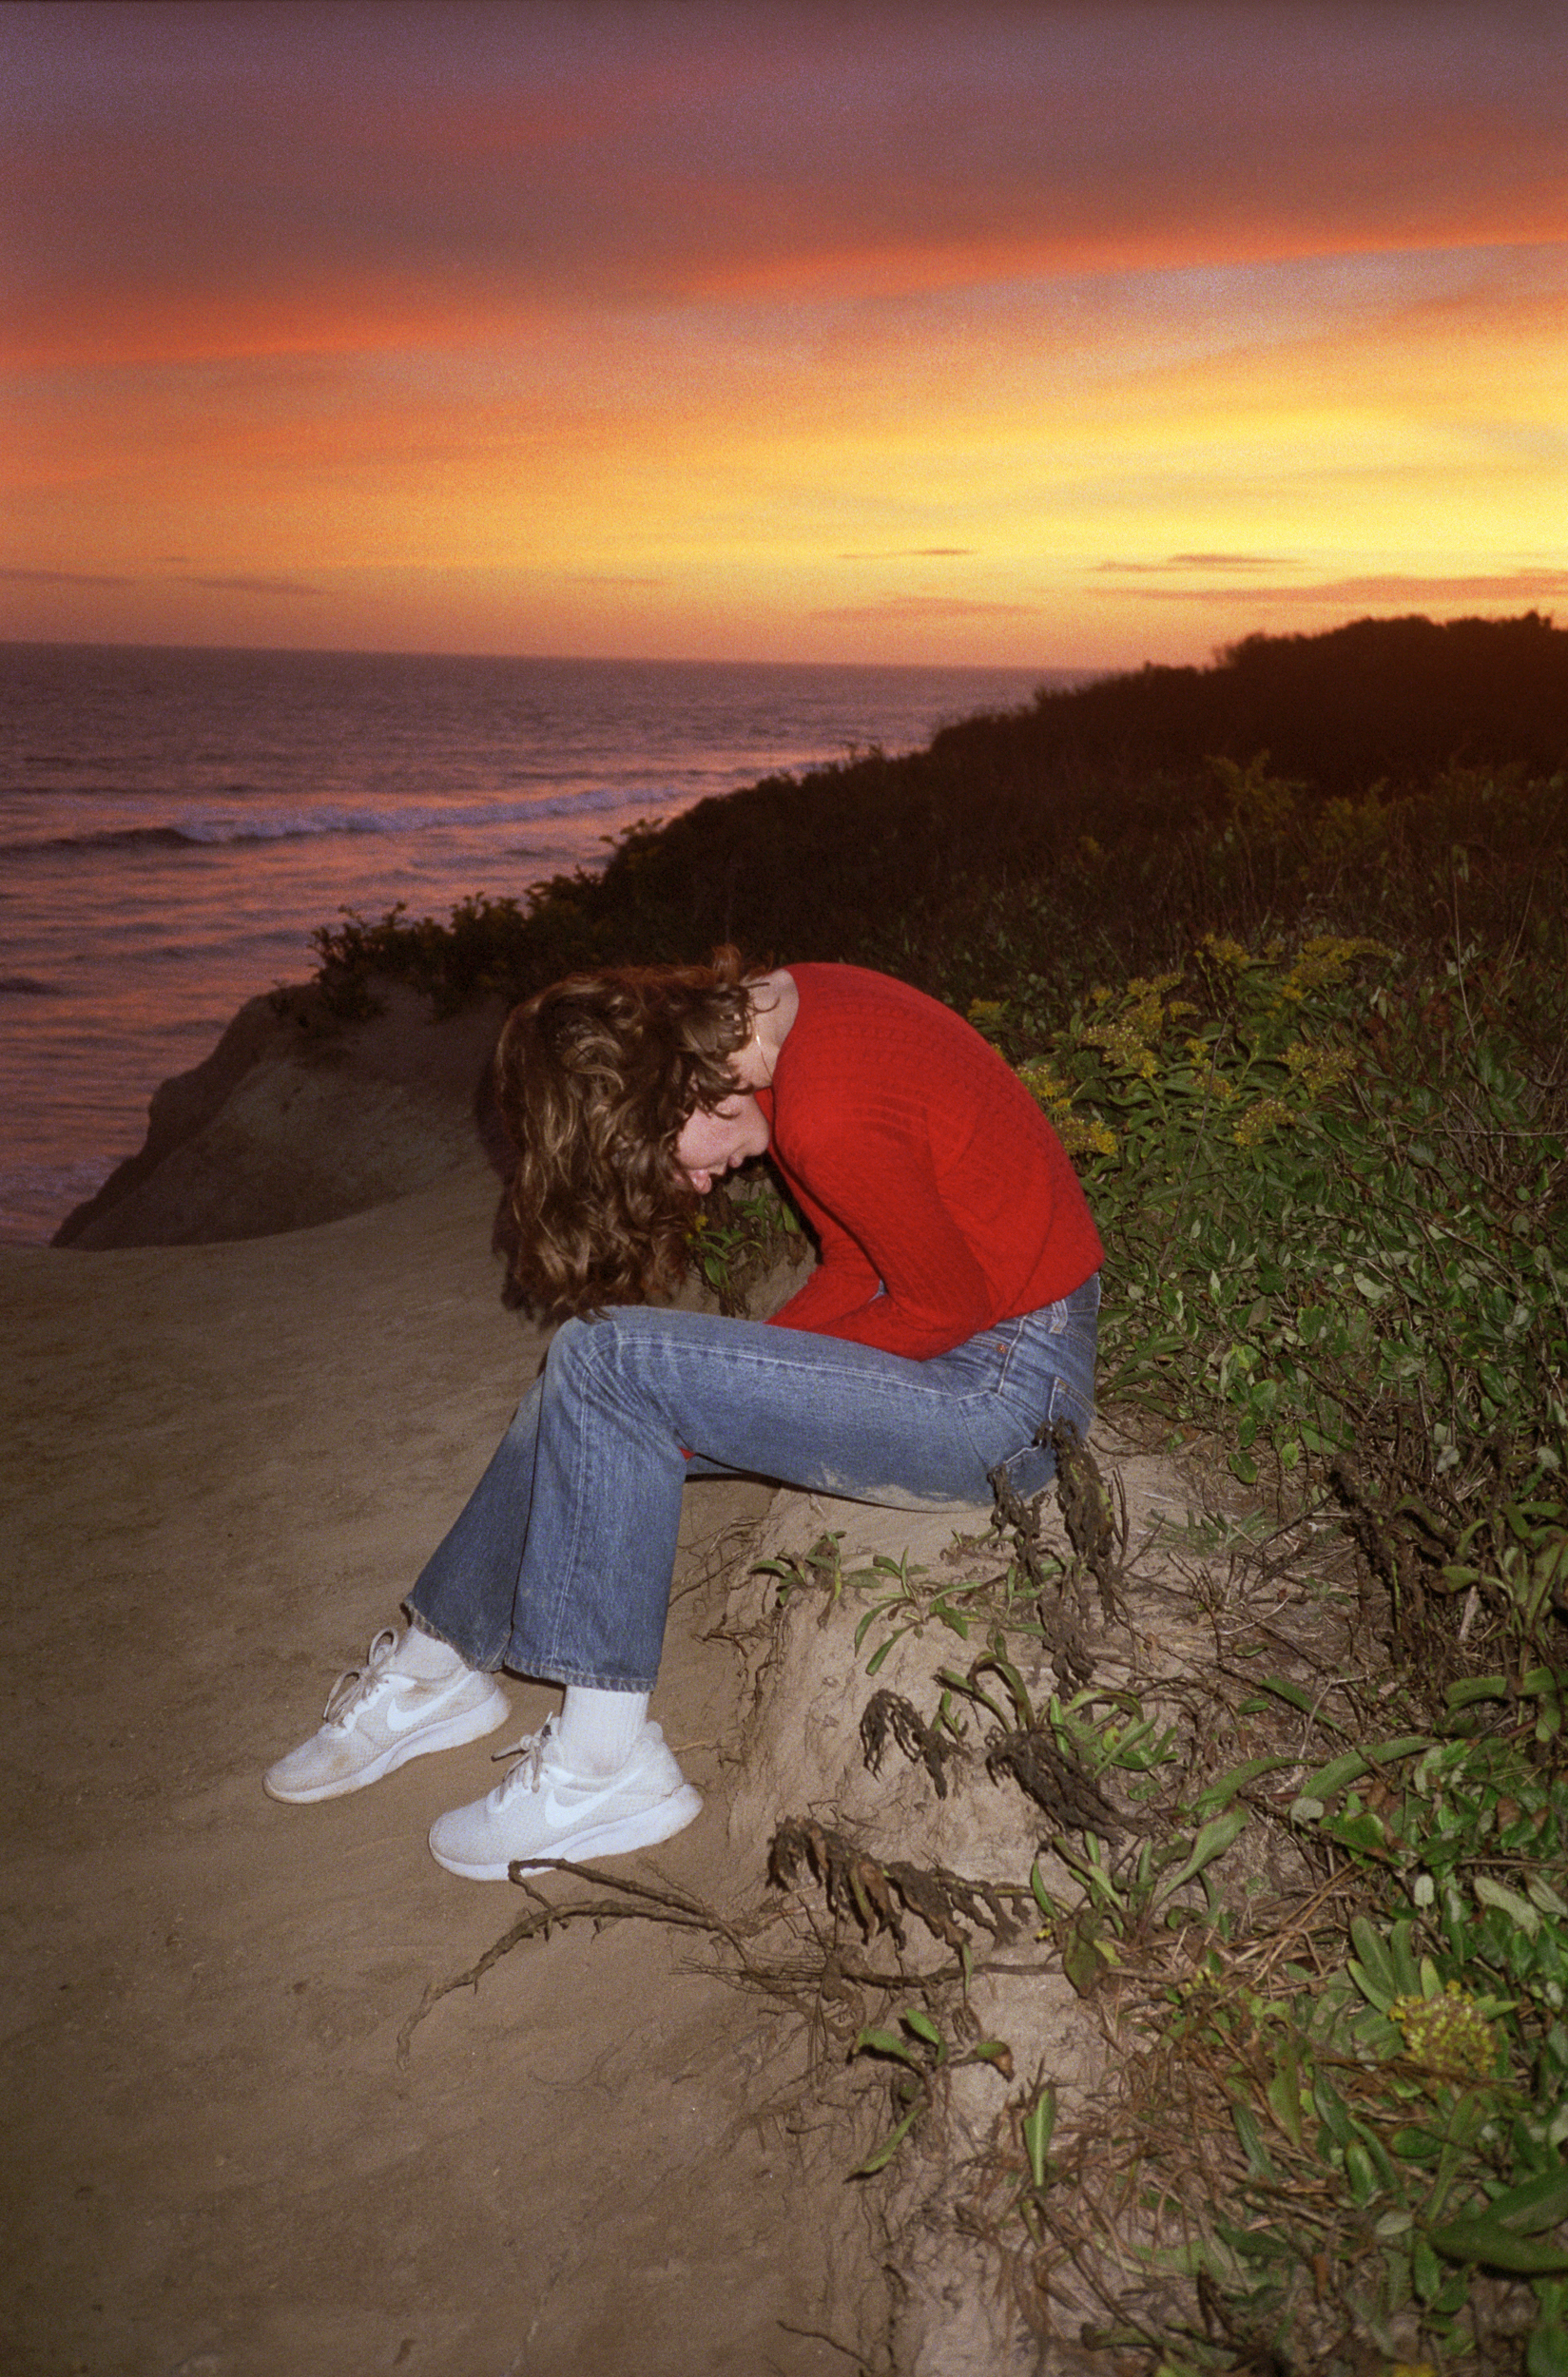 a person in a red sweater and jeans leans over in front of a beach sunset